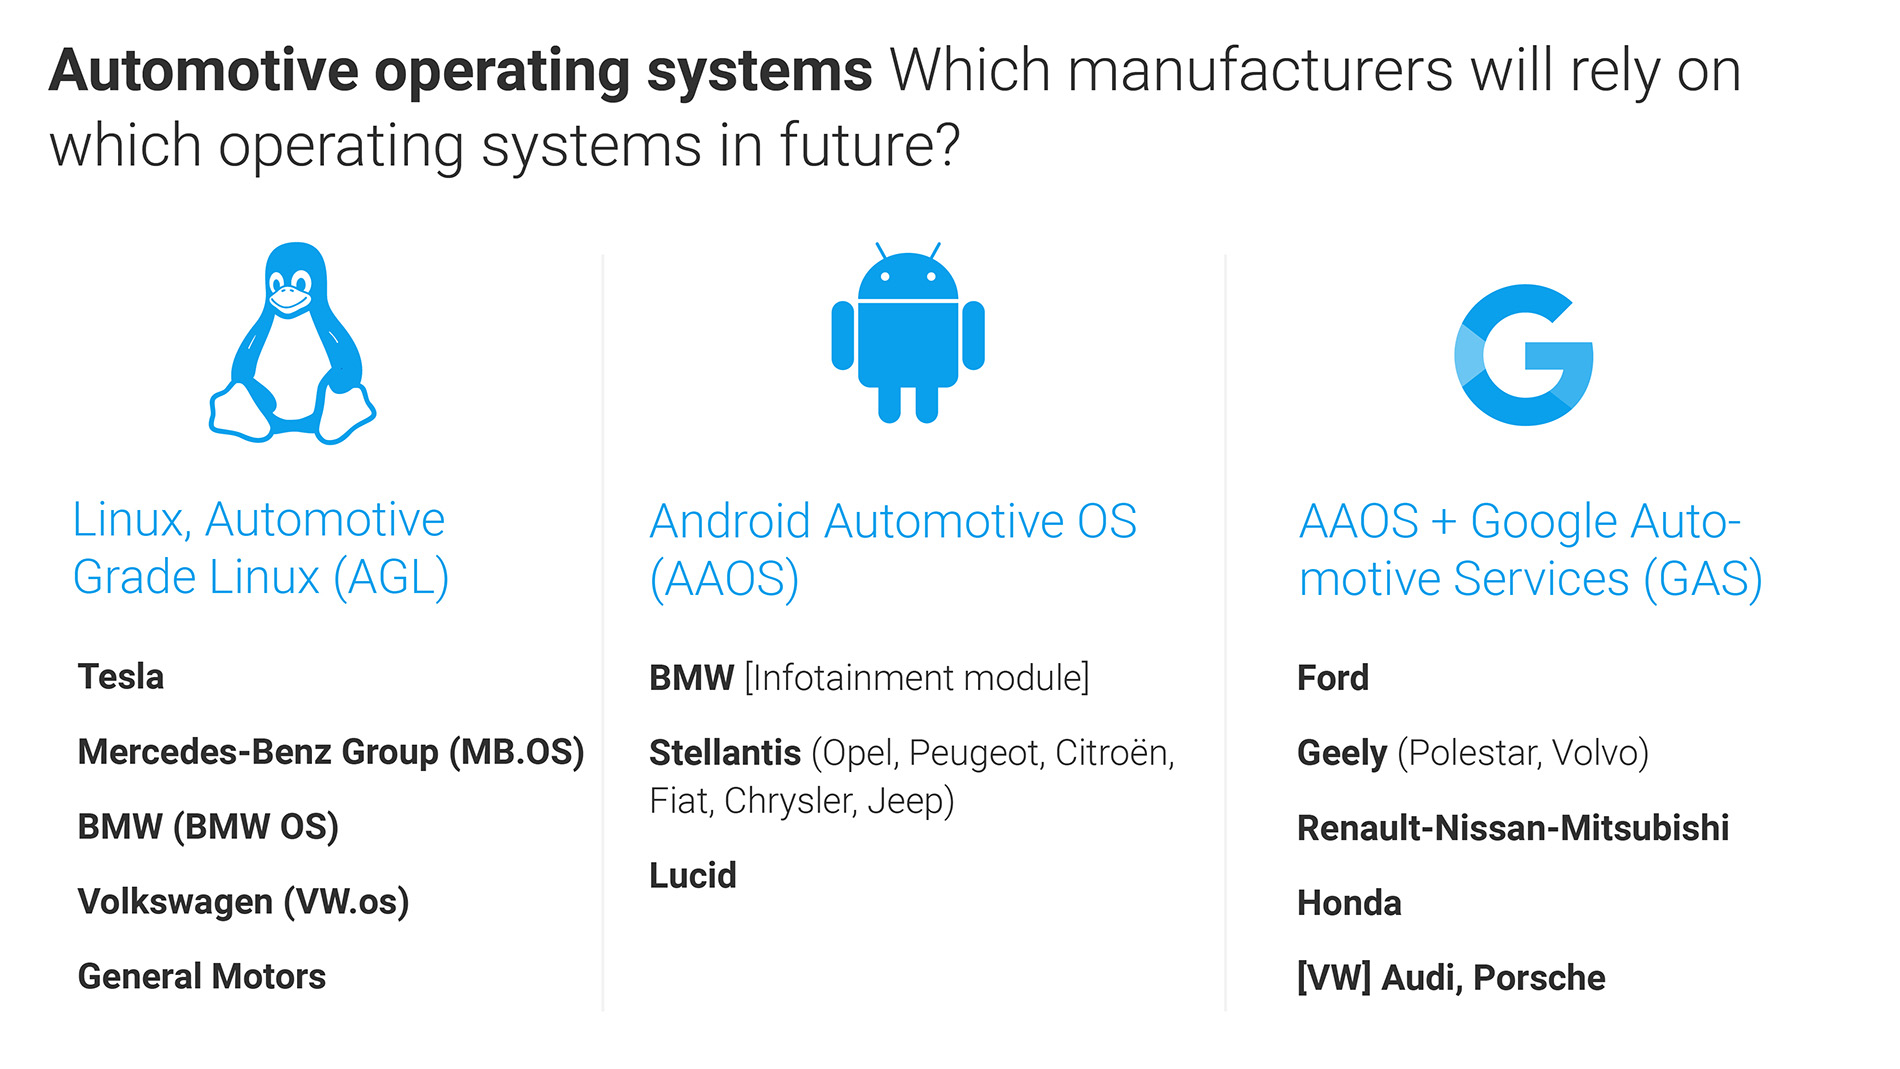 Everyone wants to get in the car: the battle of the operating systems